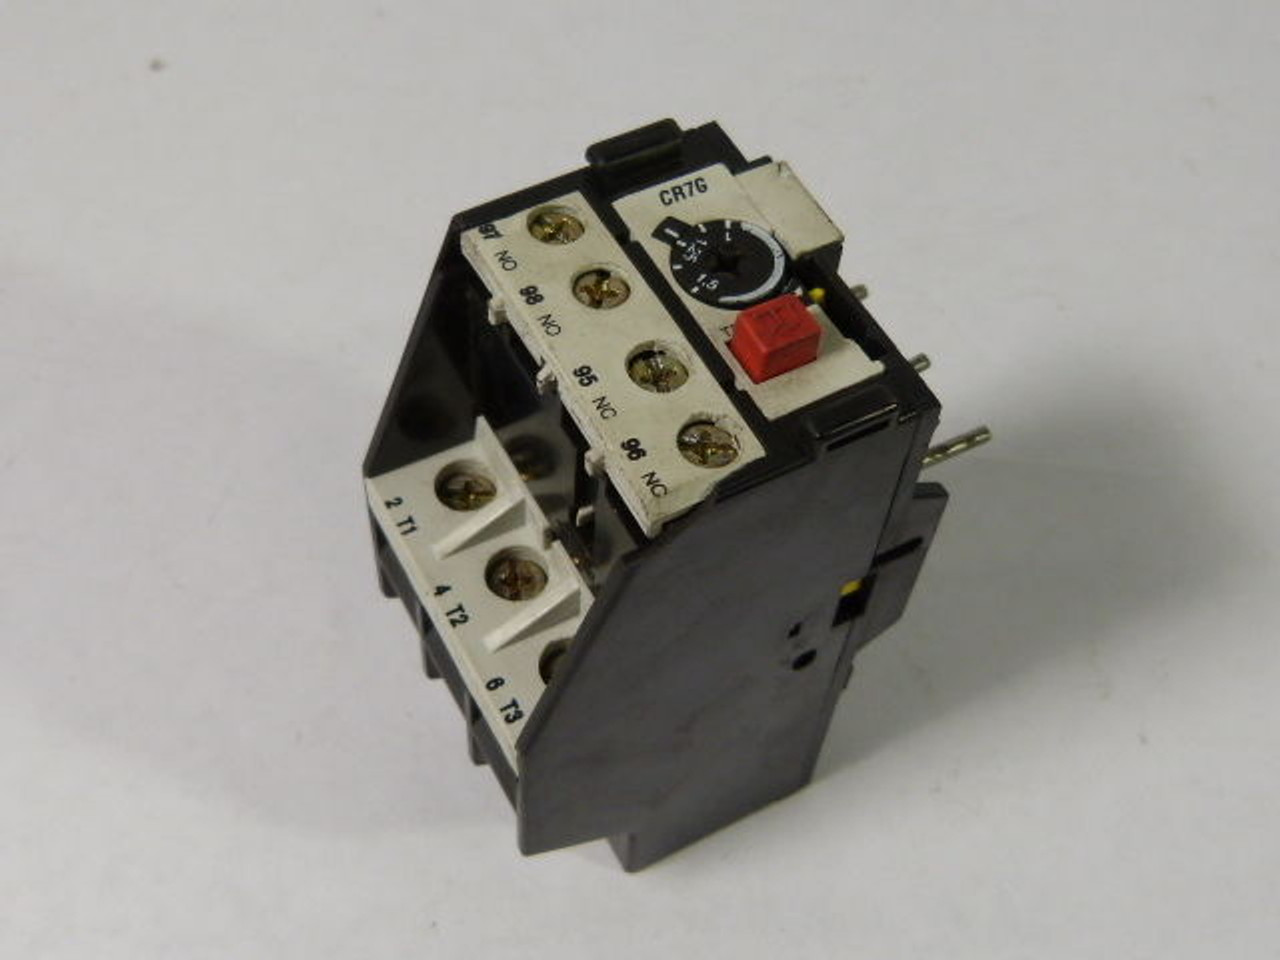 General Electric CR7G1TF Overload Relay 1.0-1.5amp USED